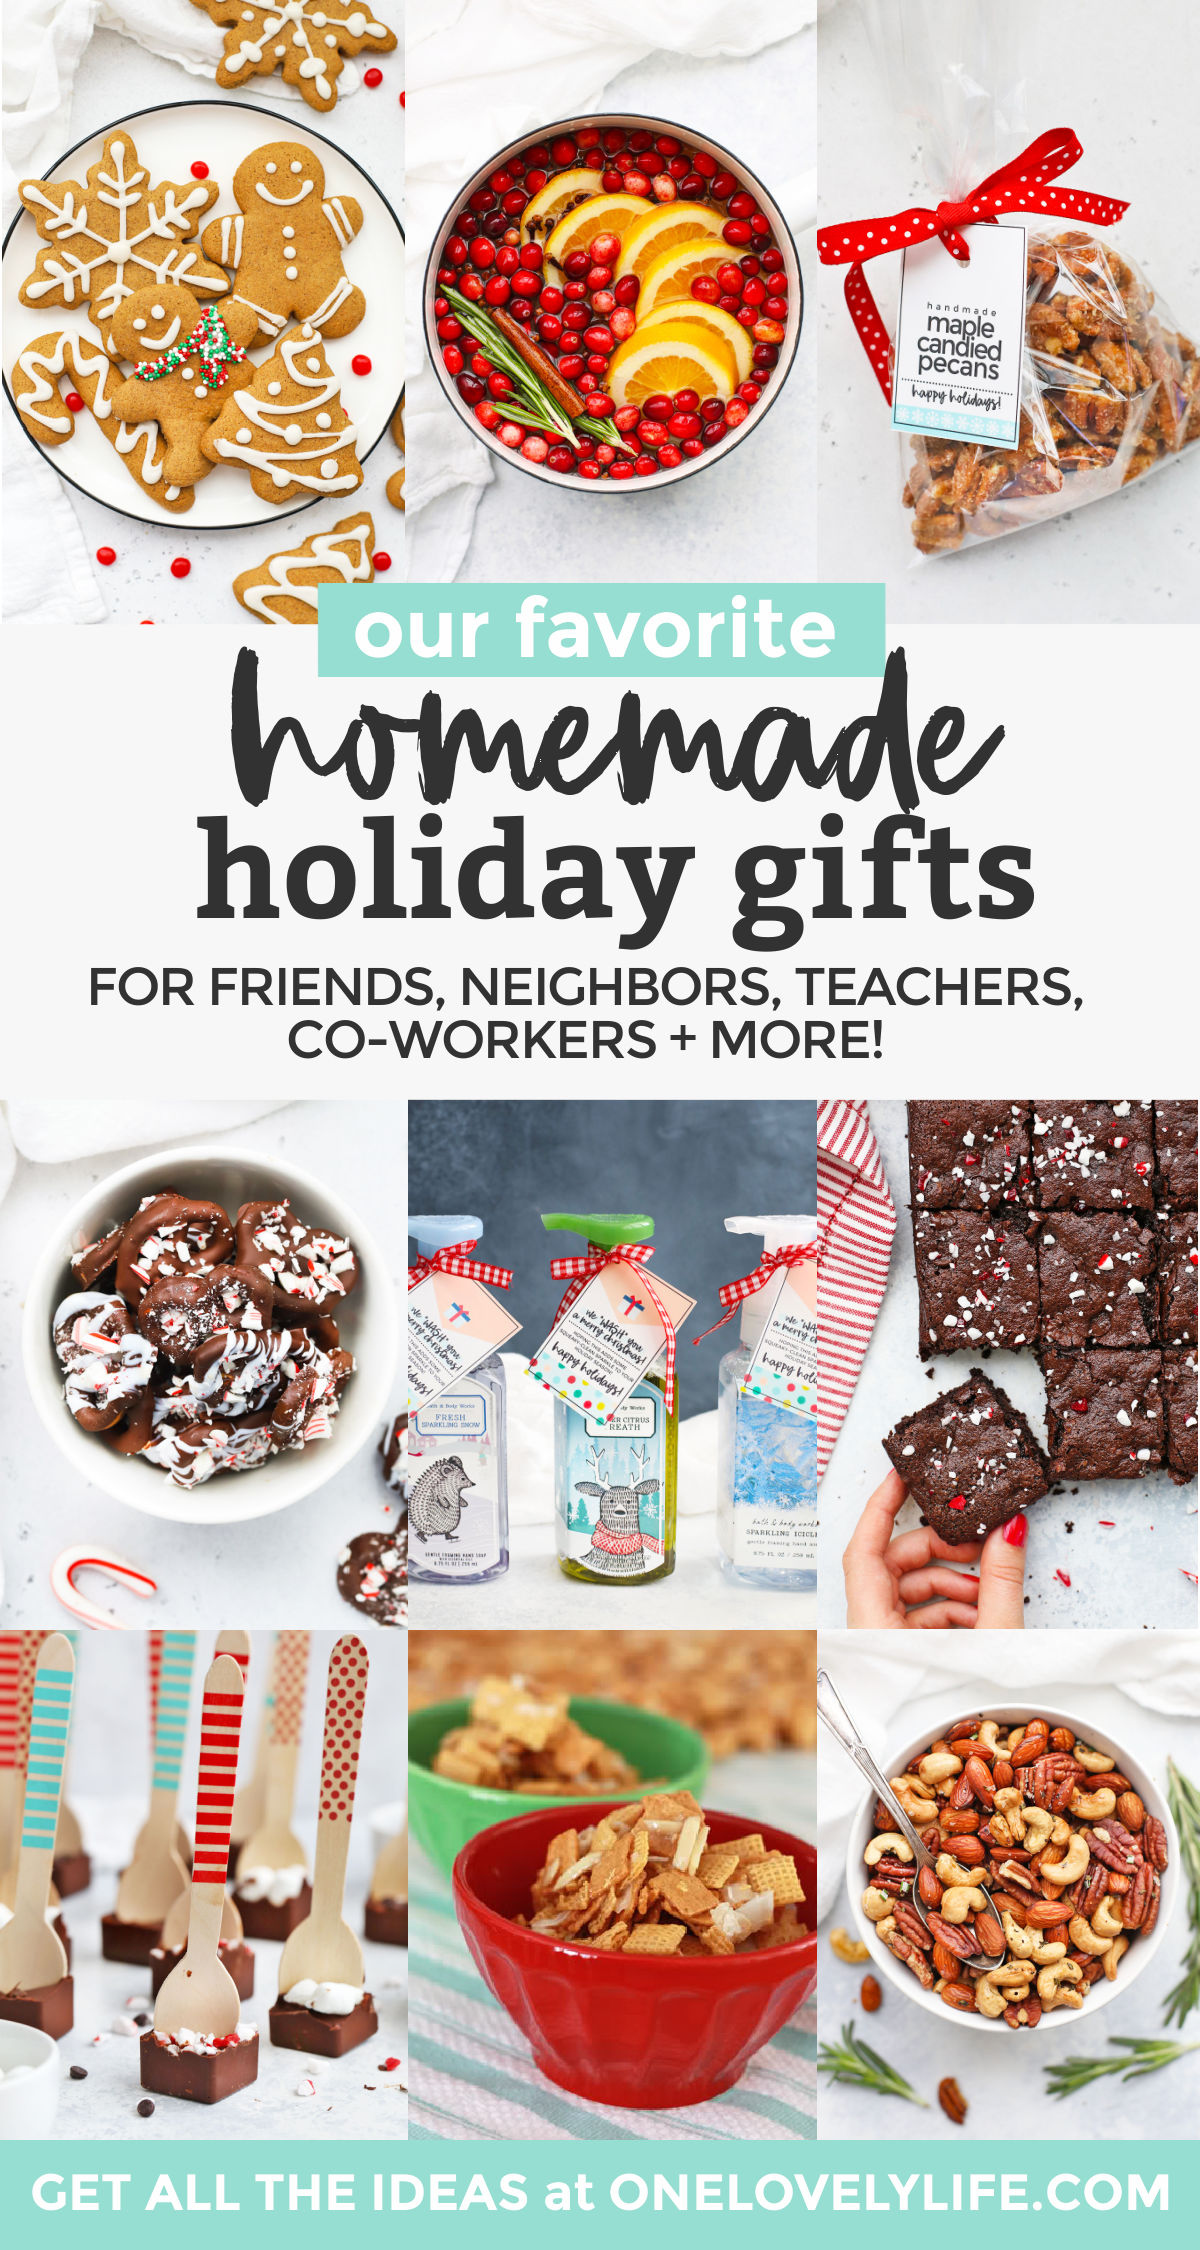 Our Best Homemade Christmas Gifts - These easy DIY holiday gifts are so fun to share with friends, neighbors, teachers, co-workers + more! // DIY Christmas Gifts // Homemade Holiday Gift // Edible Holiday Gift // Christmas Cookie Plate #giftidea #diychristmas #homemadegift